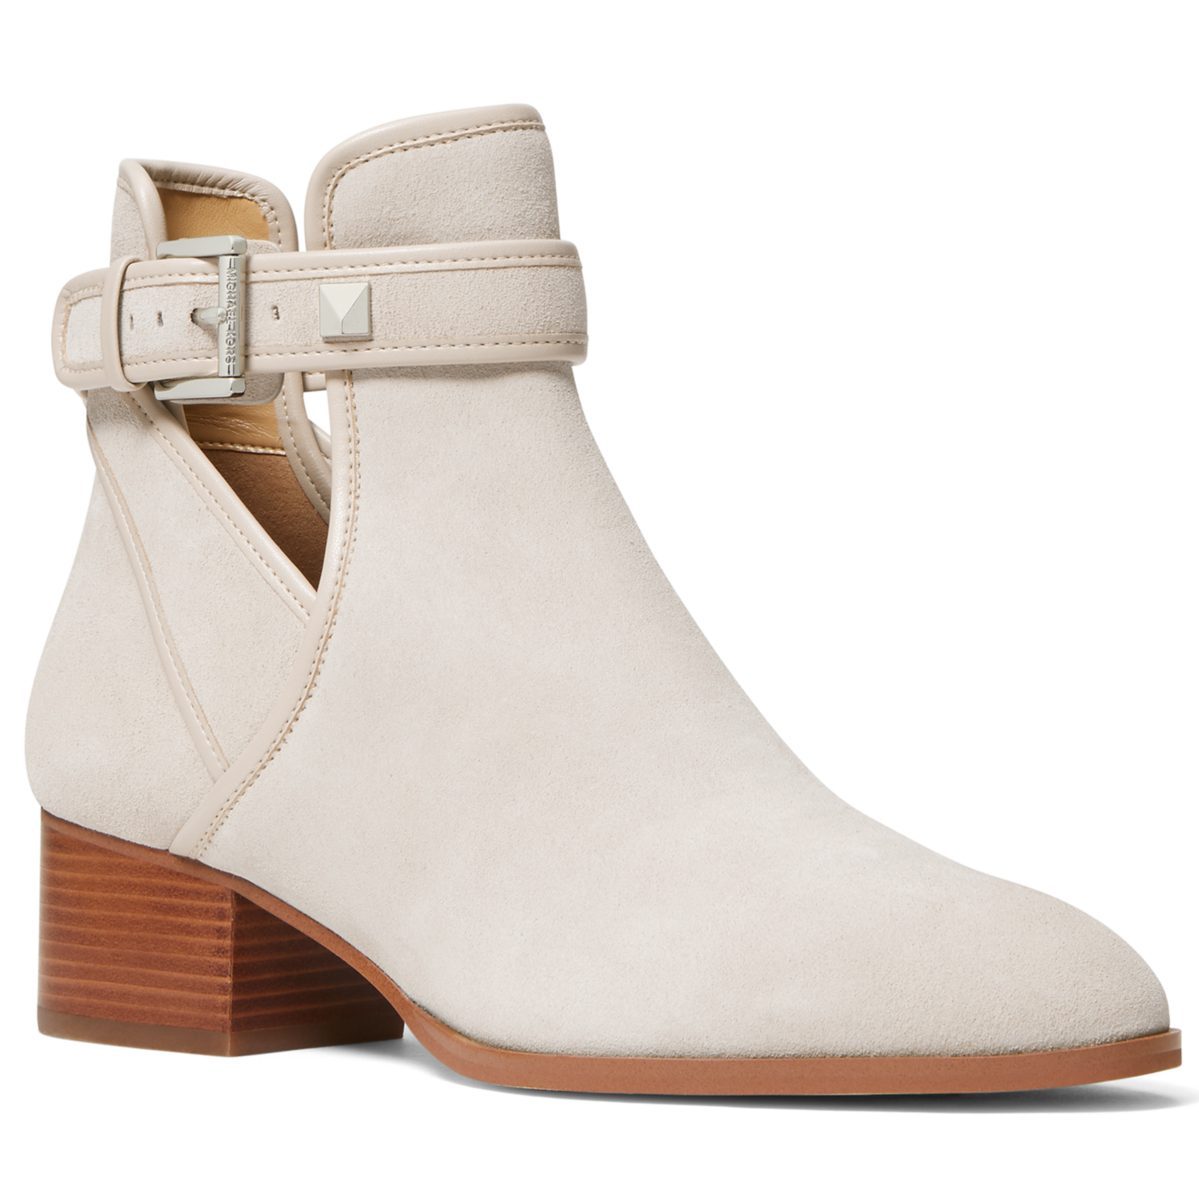 Britton Buckled Ankle Booties